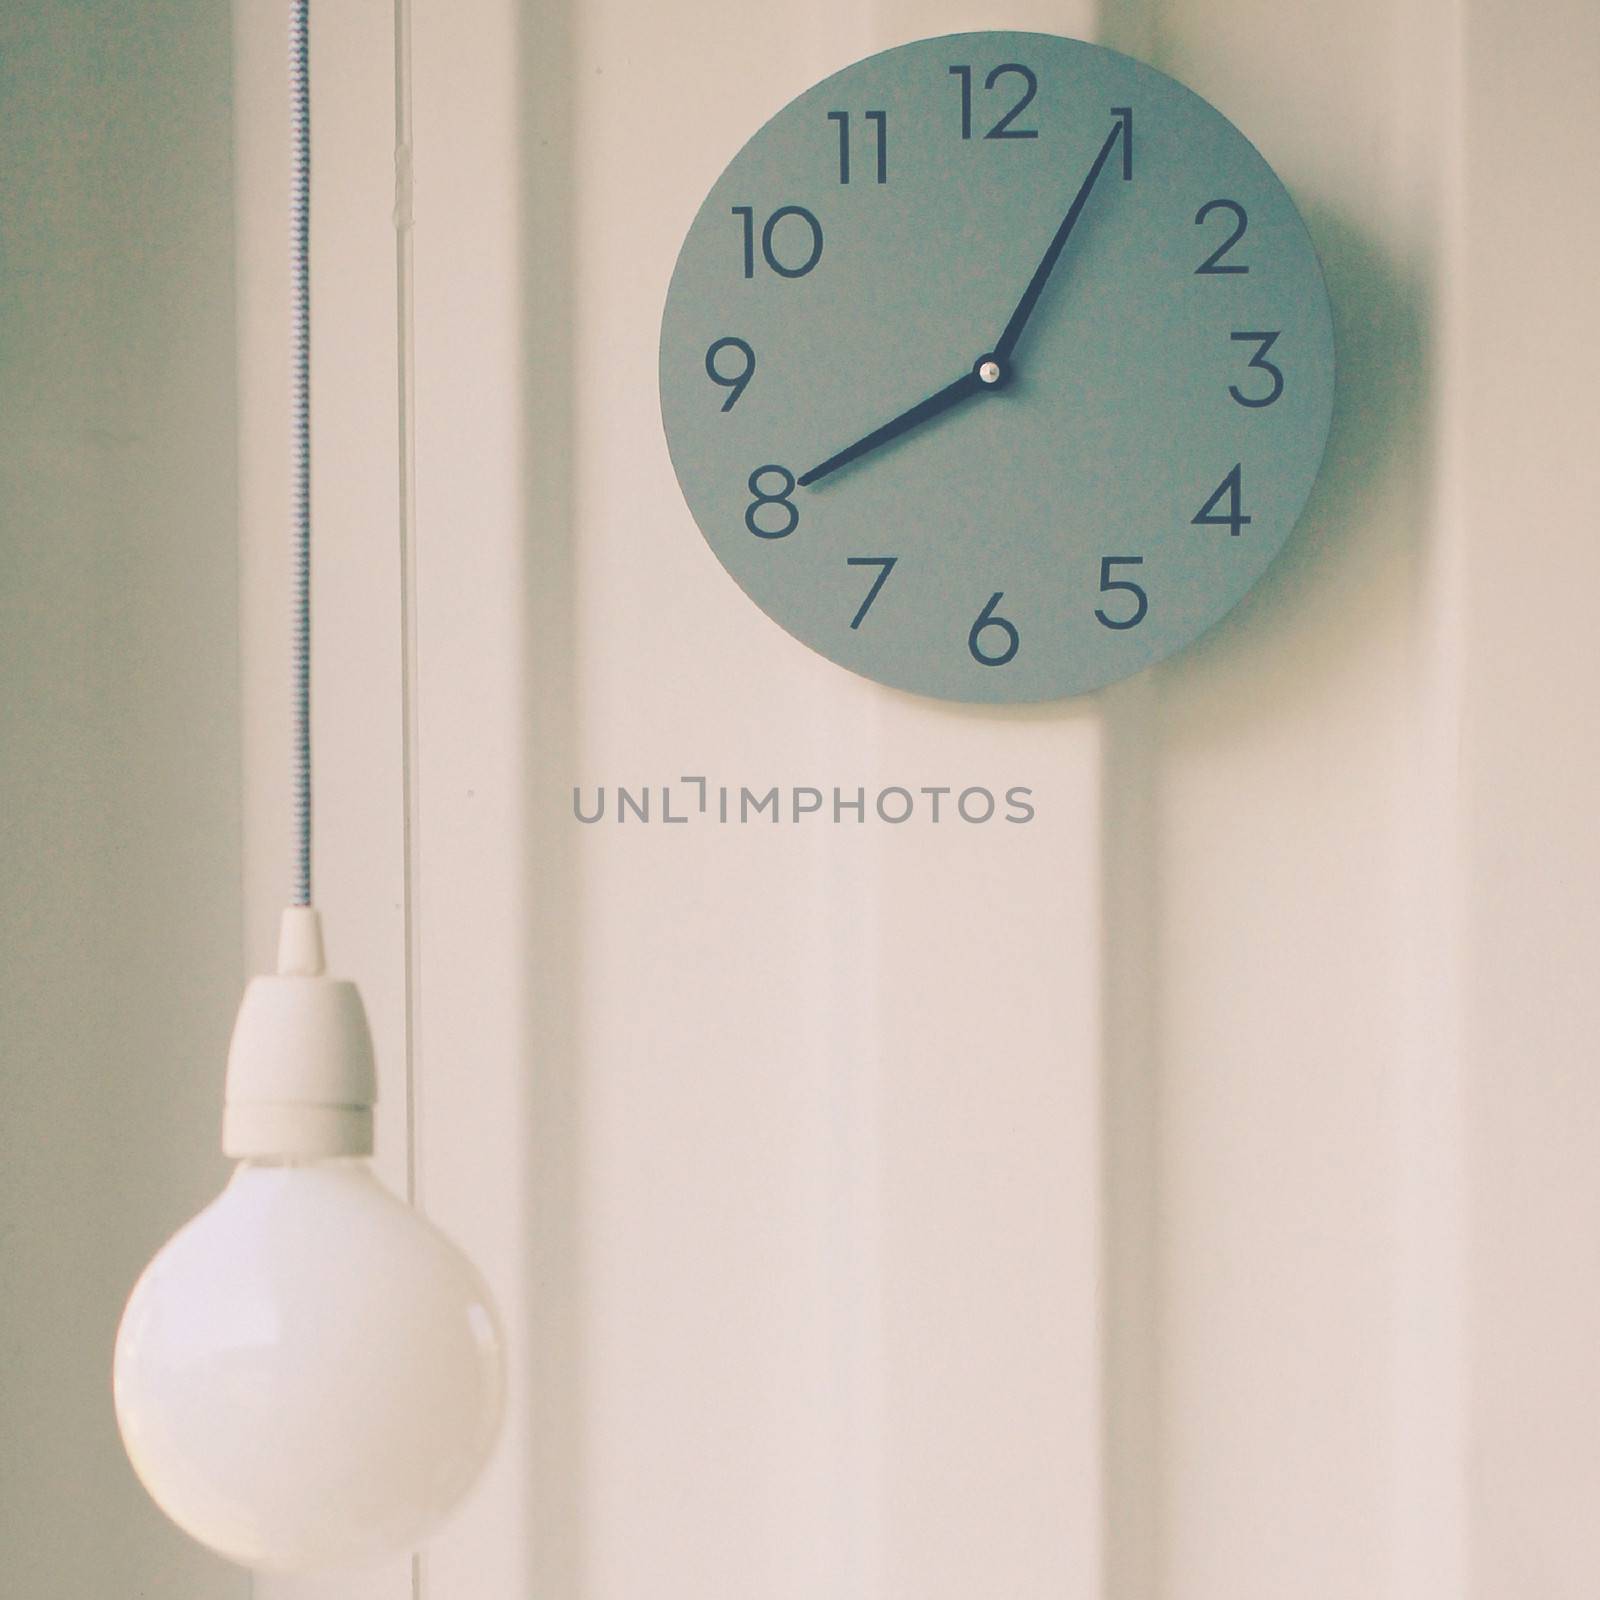 Modern lamp with wall clock, retro filter effect